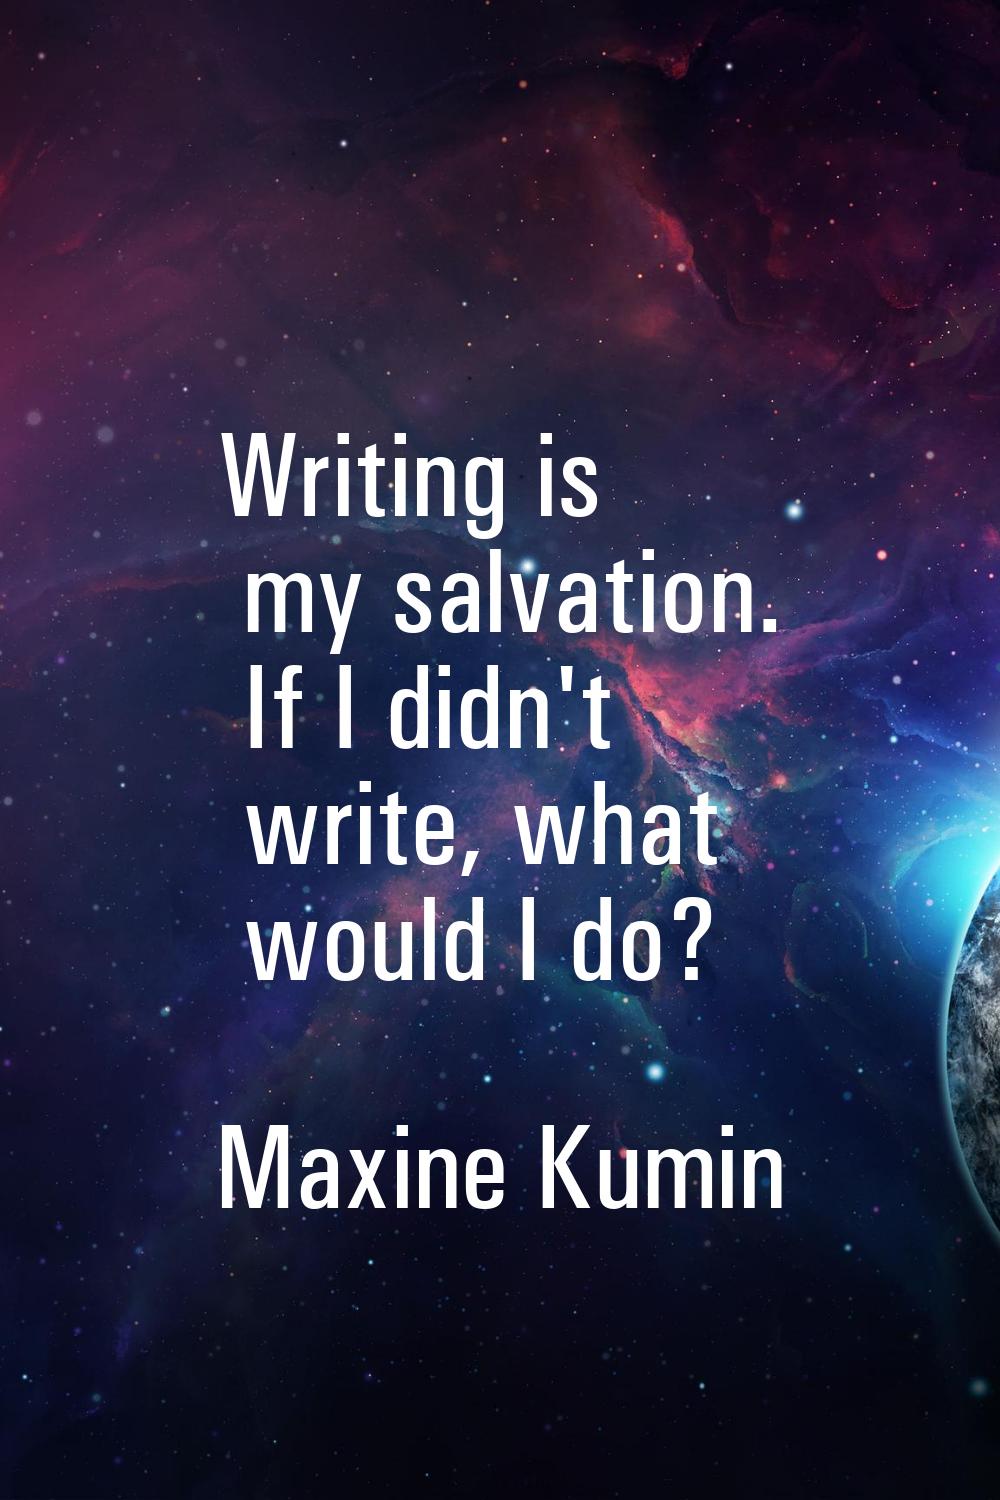 Writing is my salvation. If I didn't write, what would I do?